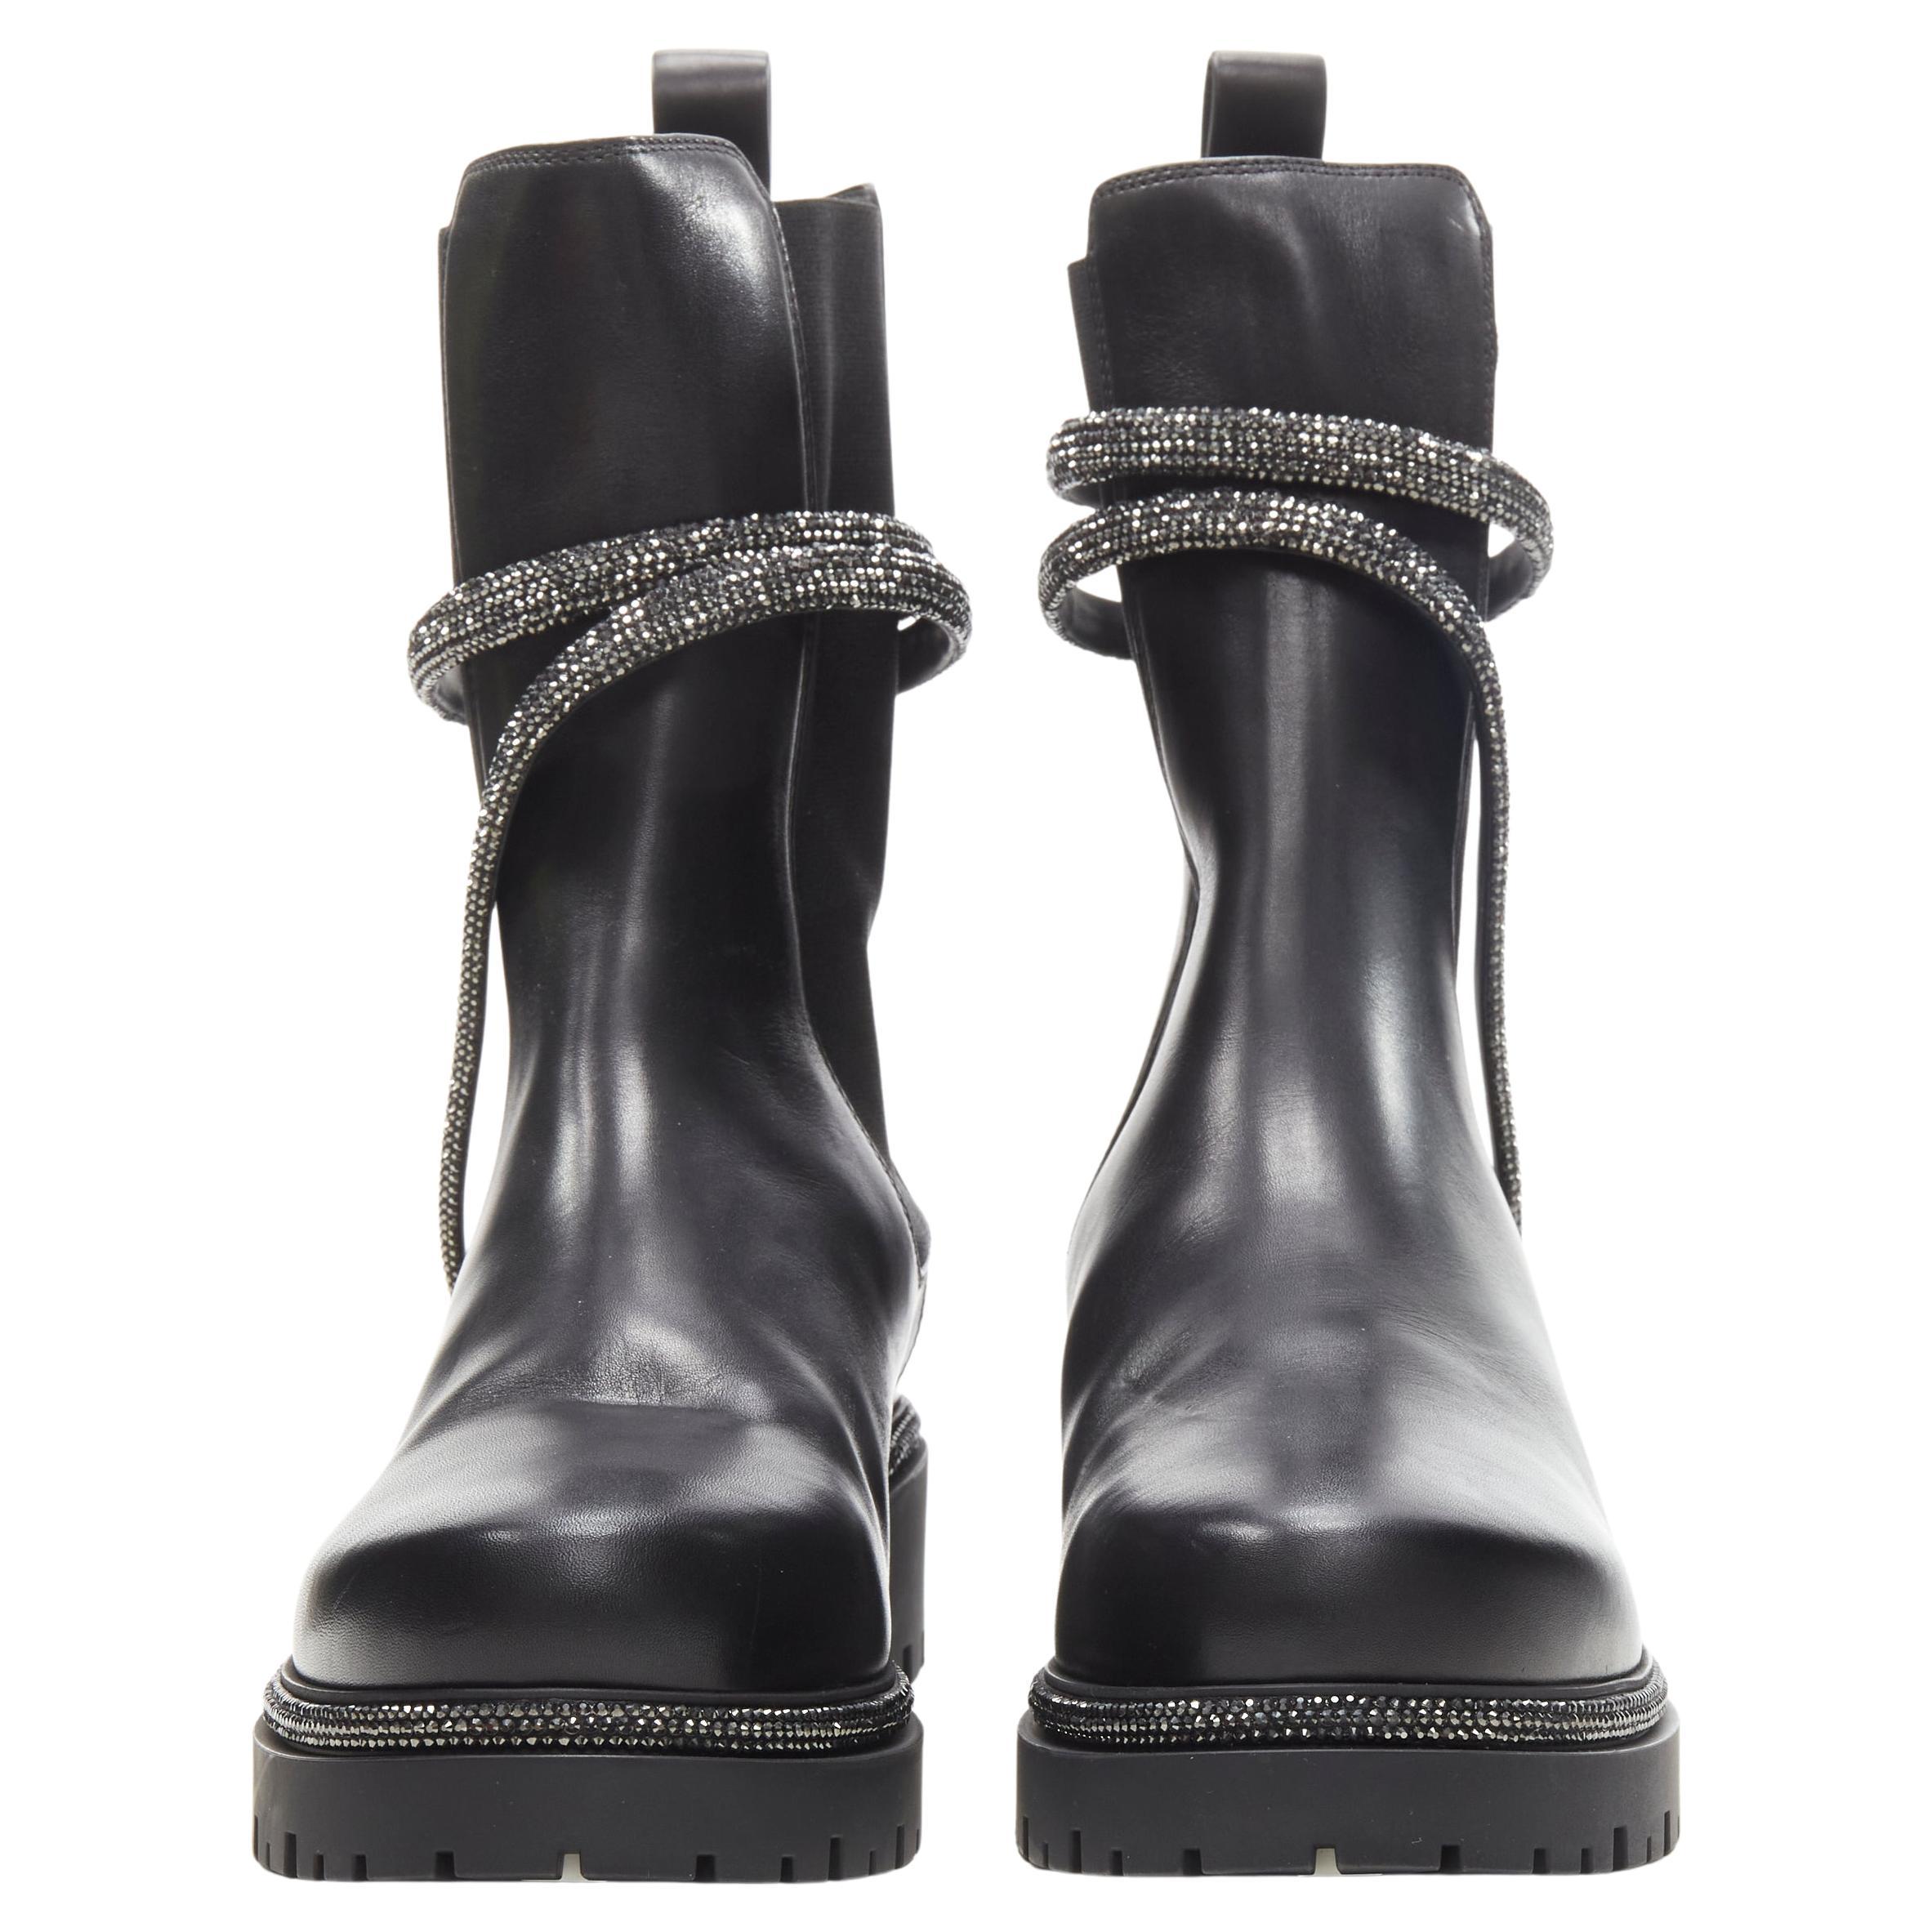 new RENE CAOVILLA Cleo black leather silver crystal serpent combat boot EU39
Brand: Rene Caovilla
Extra Detail: Stretch gusset. Cleo serpentine inspired spiral wrap detailing. Trucker lug sole.

CONDITION:
Condition: New without tags.